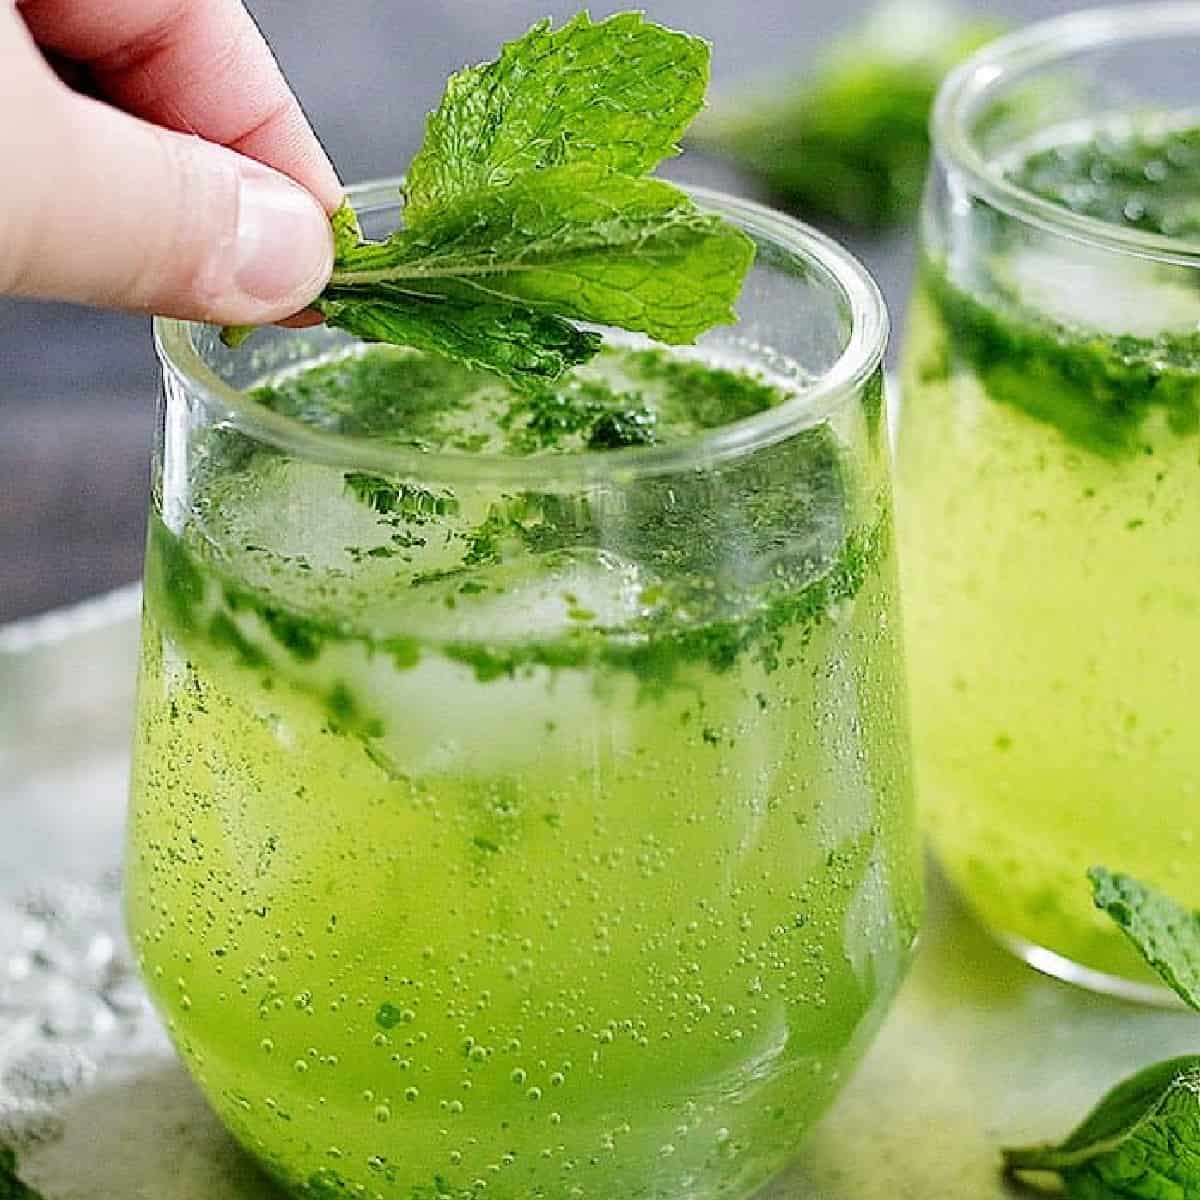 Make your summer much cooler with this delicious and easy homemade mint ginger mocktail. It's refreshing, delicious, and your family will love it!
